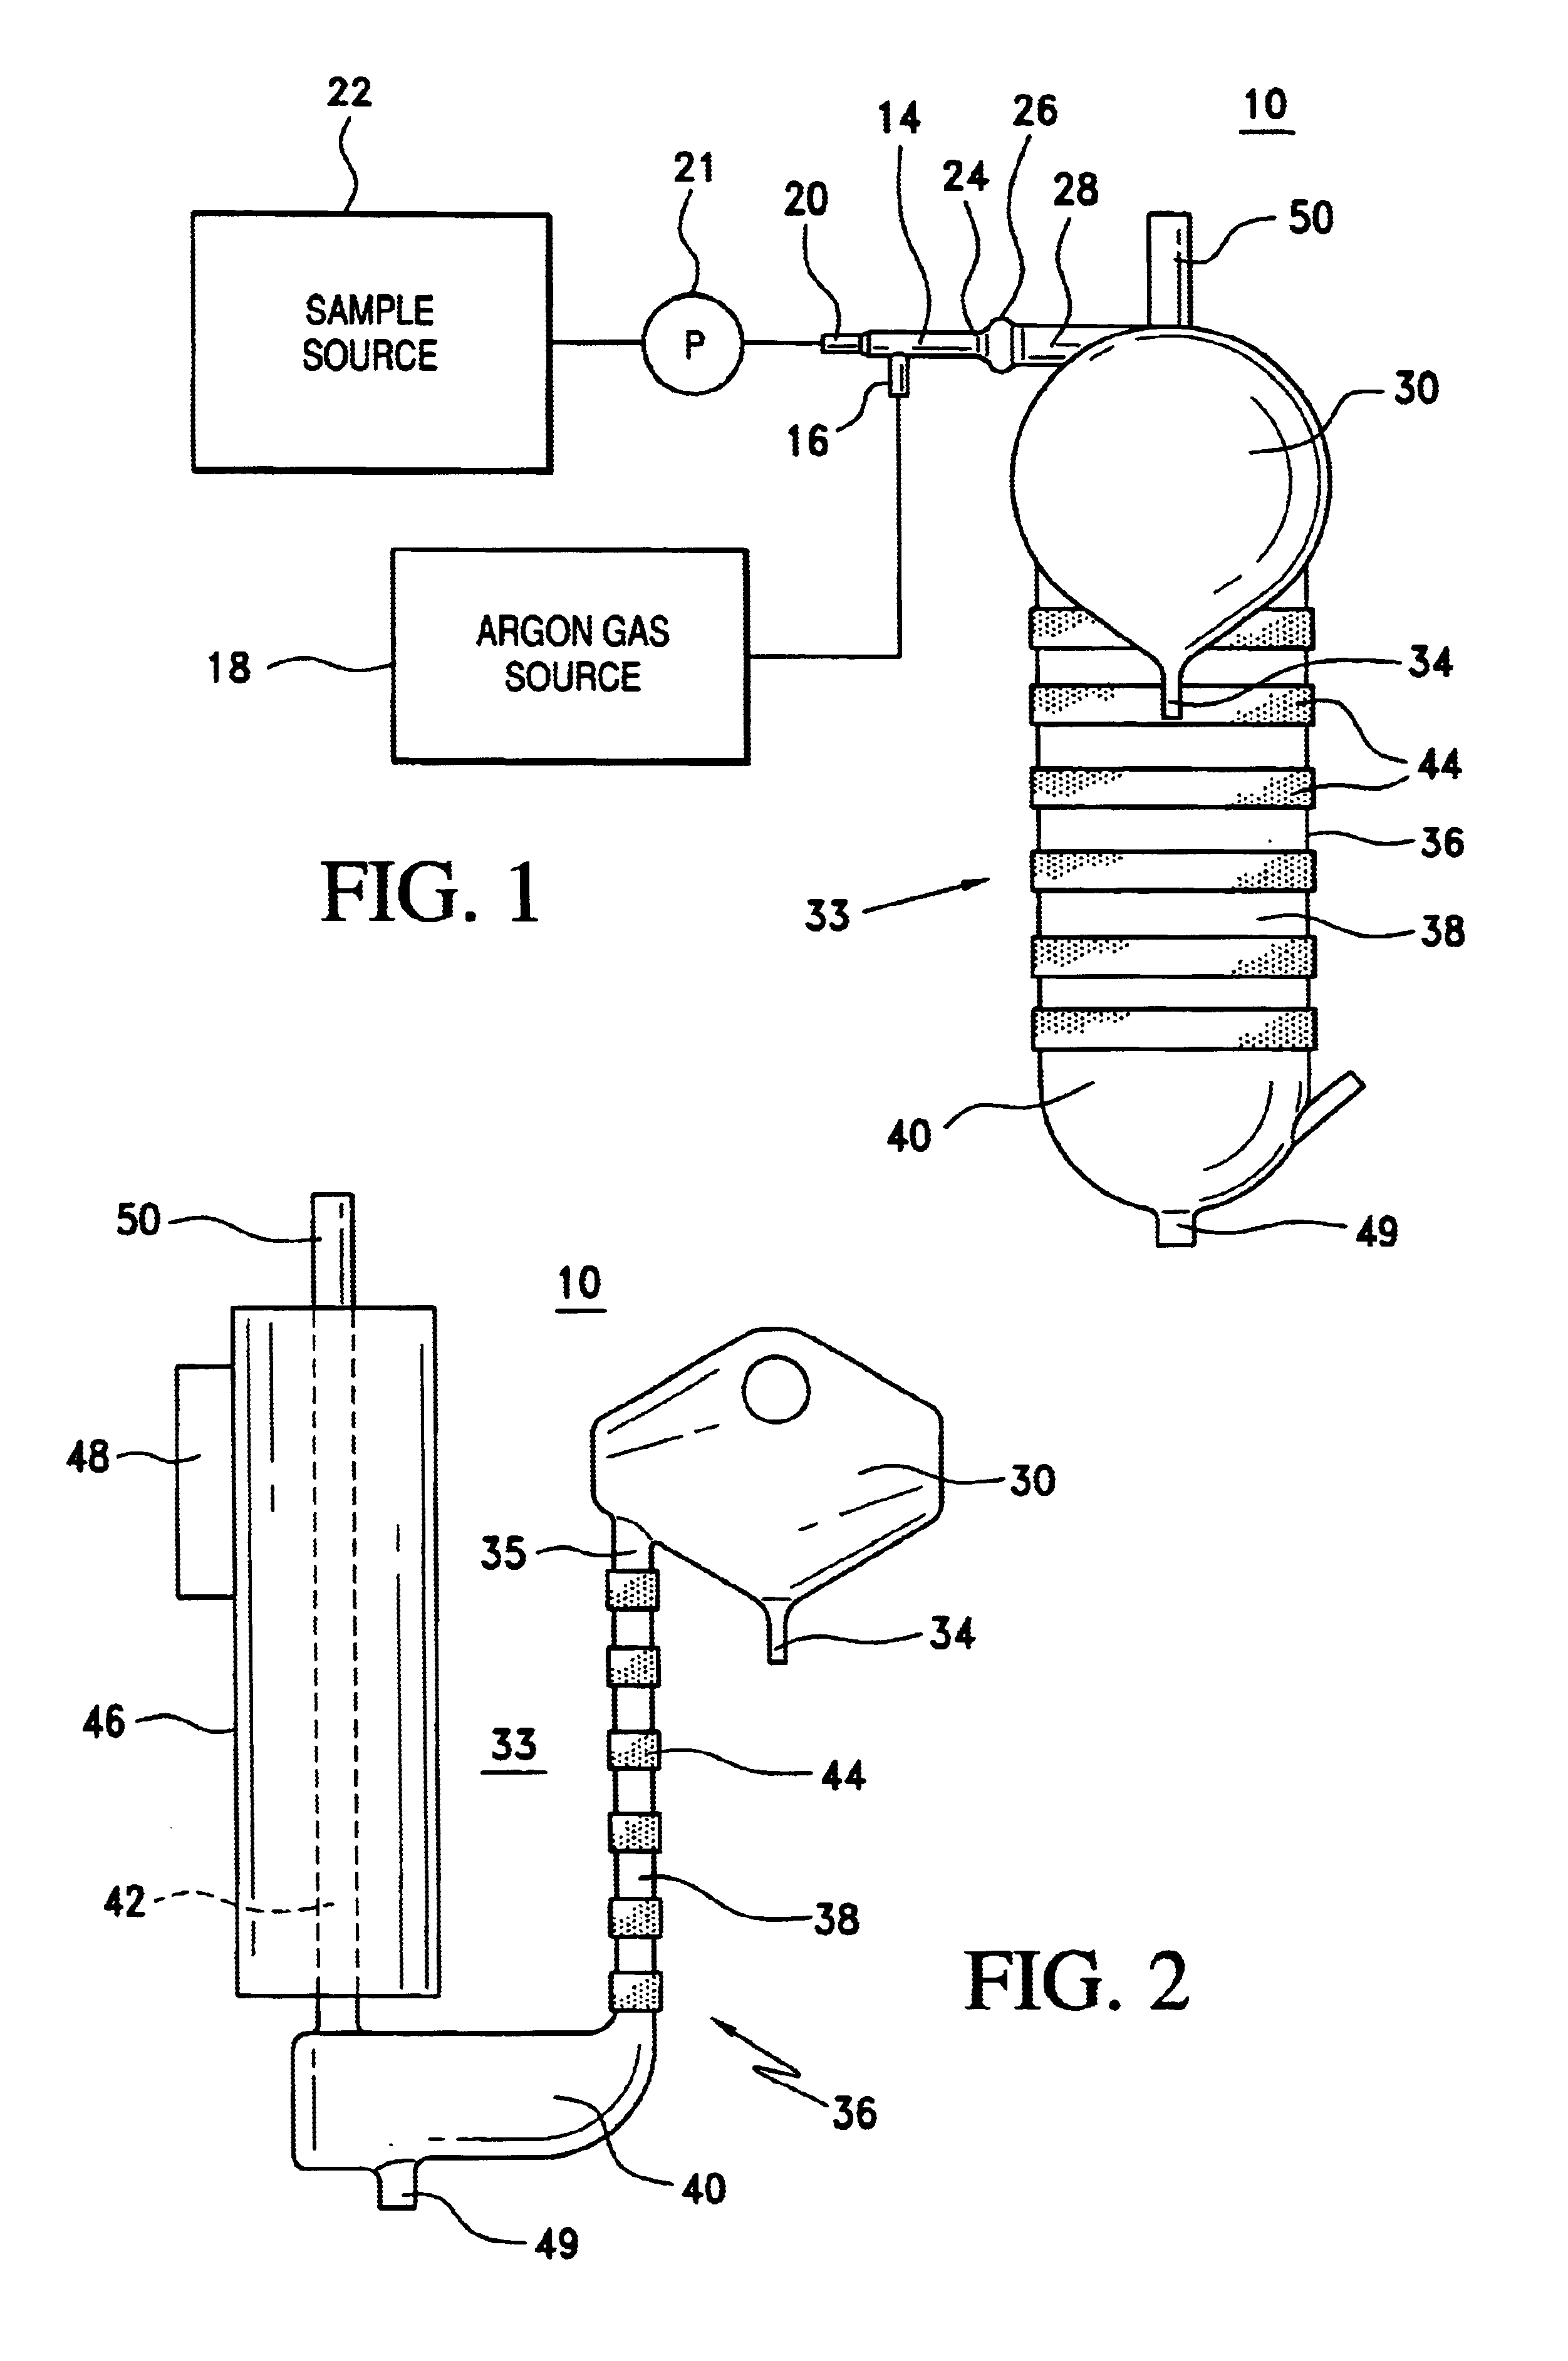 Spectrometer sample generating and injecting system using a microliter nebulizer